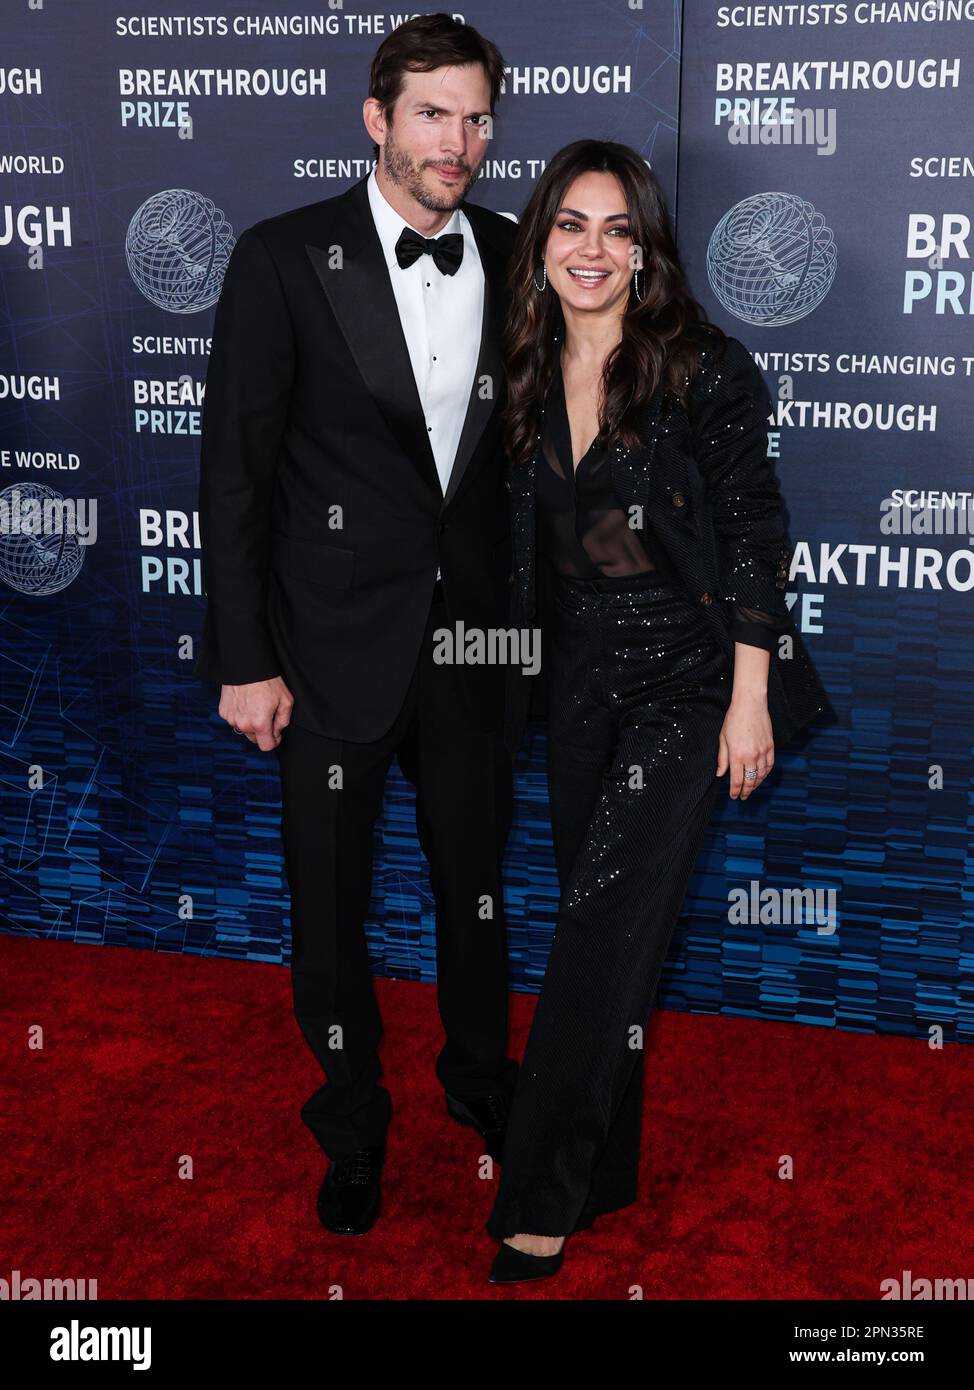 LOS ANGELES, CALIFORNIA, USA - APRIL 15: Ashton Kutcher and wife Mila Kunis arrive at the 9th Annual Breakthrough Prize Ceremony held at the Academy Museum of Motion Pictures on April 15, 2023 in Los Angeles, California, United States. (Photo by Xavier Collin/Image Press Agency) Stock Photo